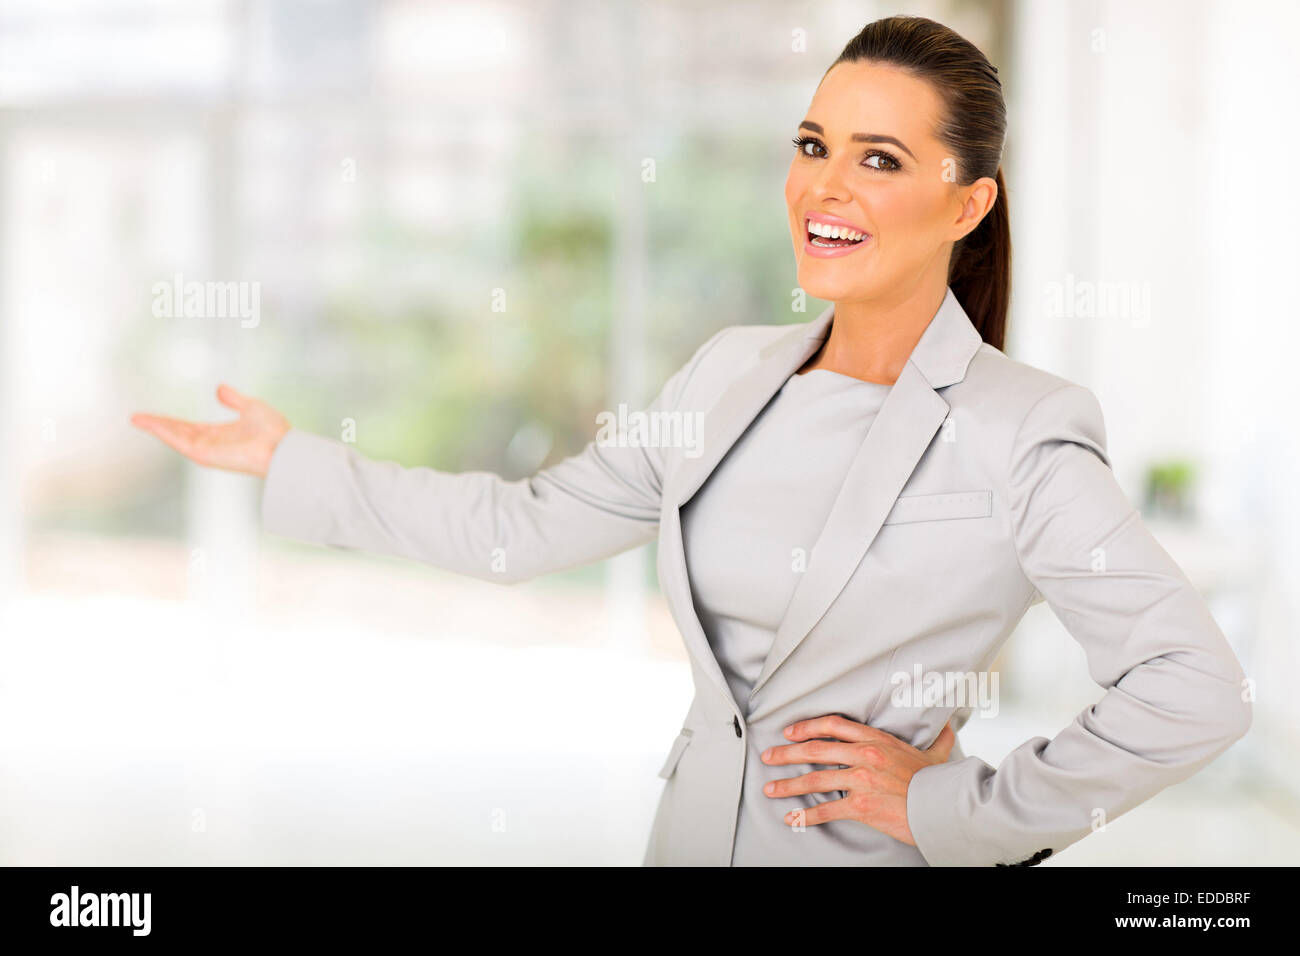 friendly businesswoman doing welcoming gesture Stock Photo